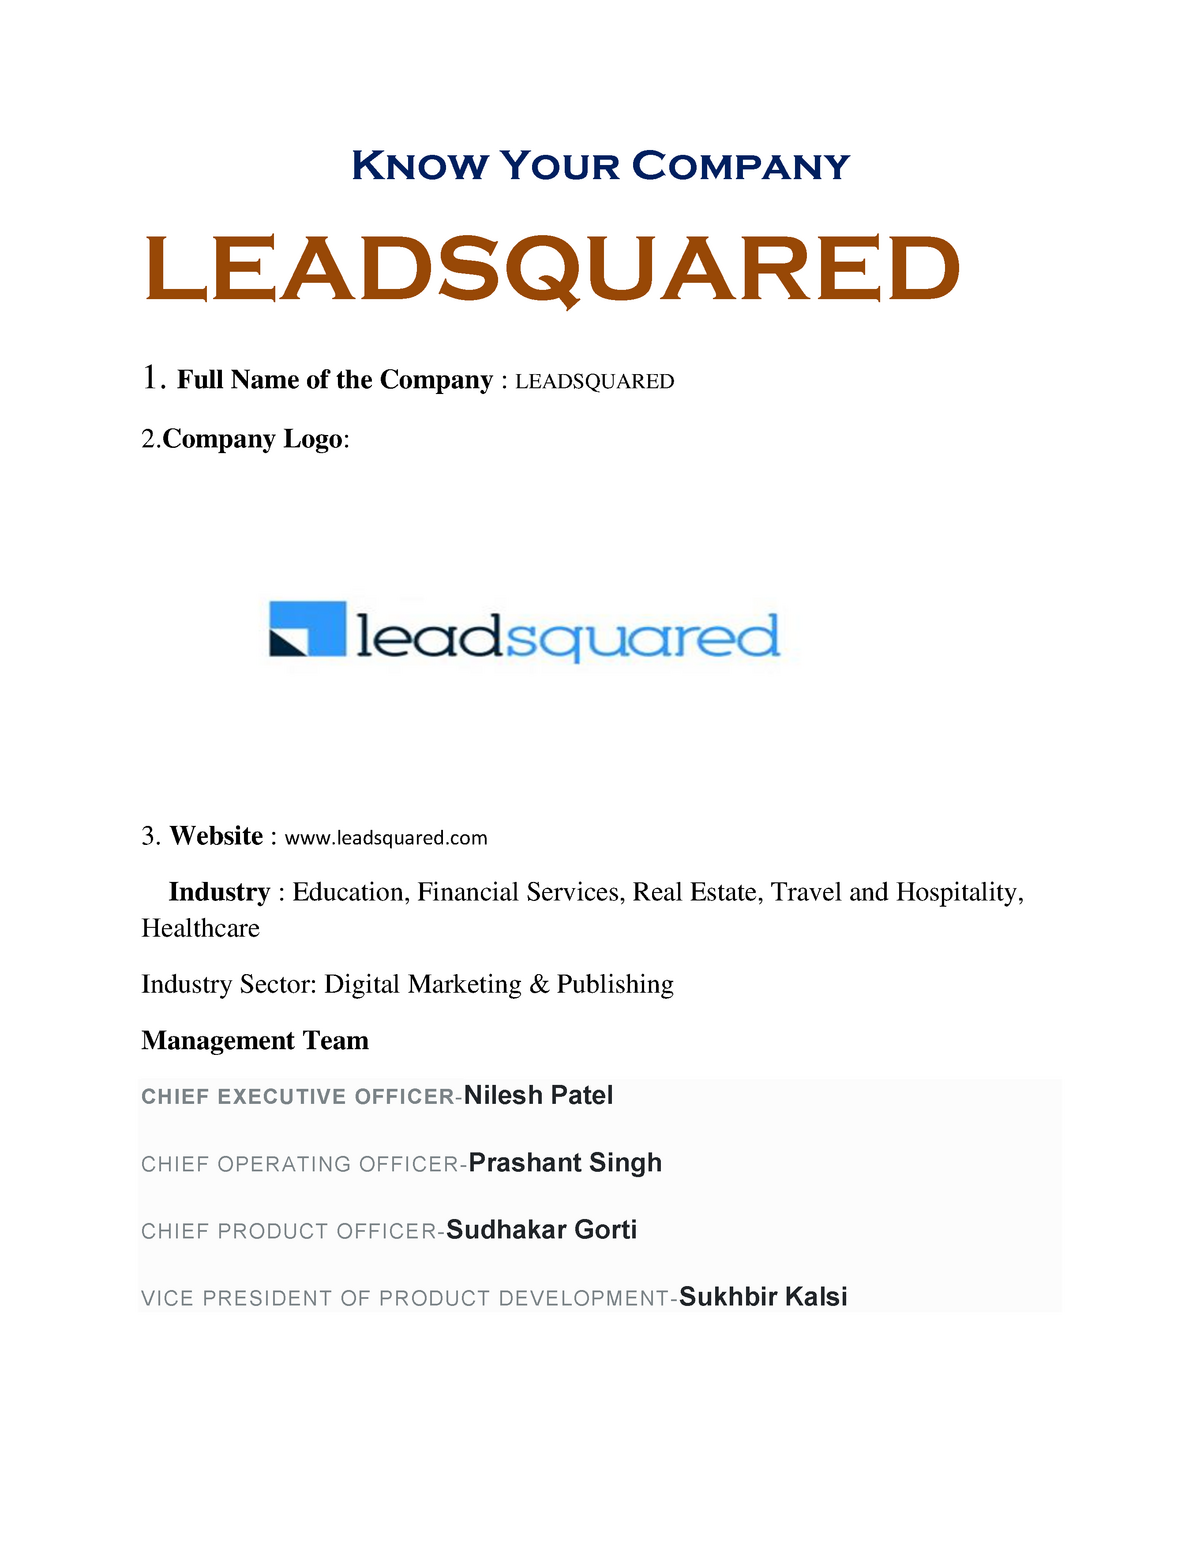 Lead Squared KYC - Warning: TT: undefined function: 32 Know Your Company  LEADSQUARED 1. Full Name of - StuDocu